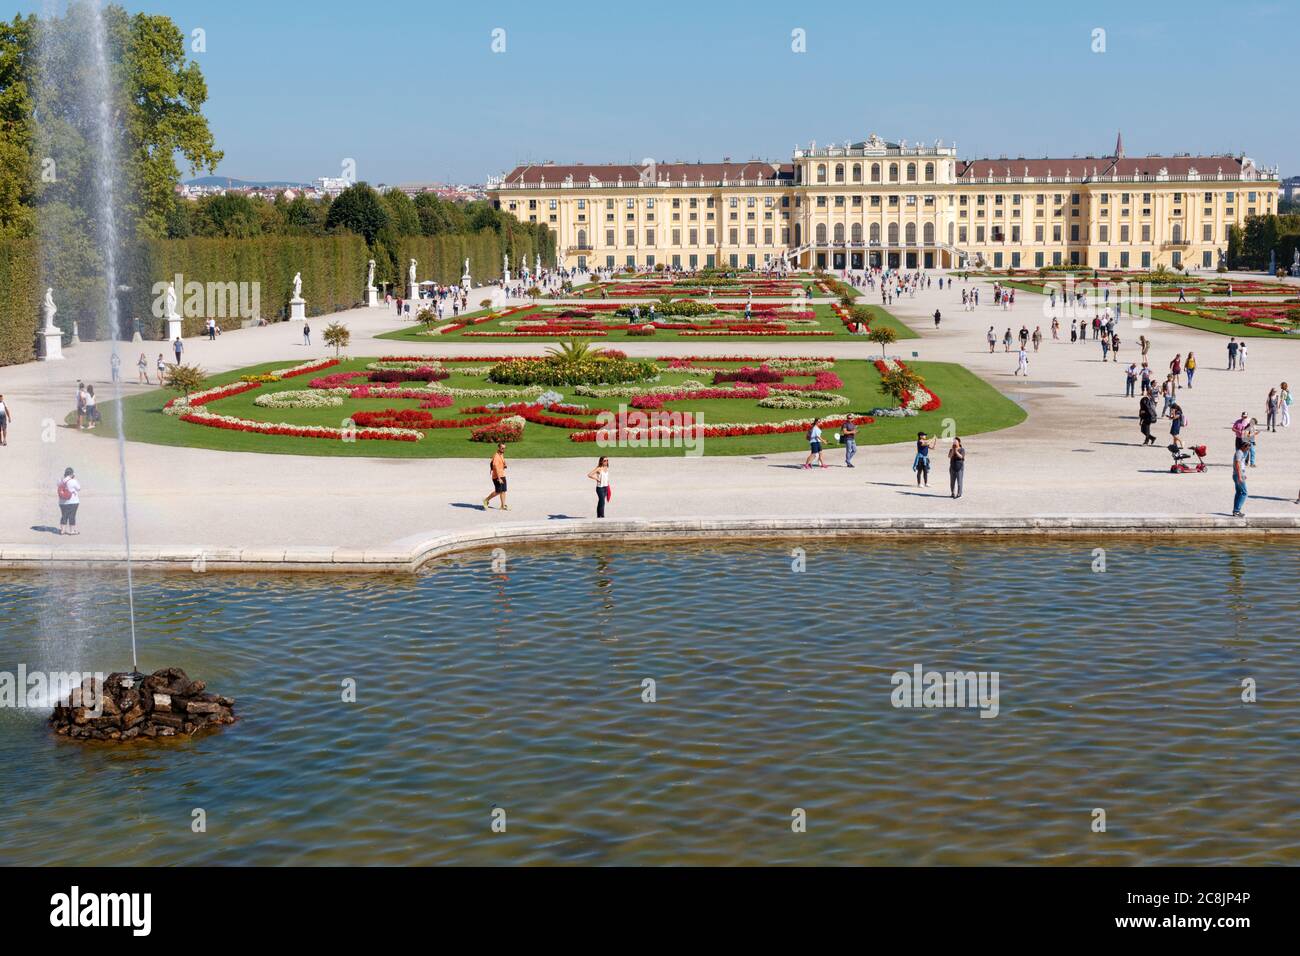 Schonbrunn palace, a former imperial summer residence. Schonbrunn palace,and gardens is listed as UNESCO World Heritage site Stock Photo